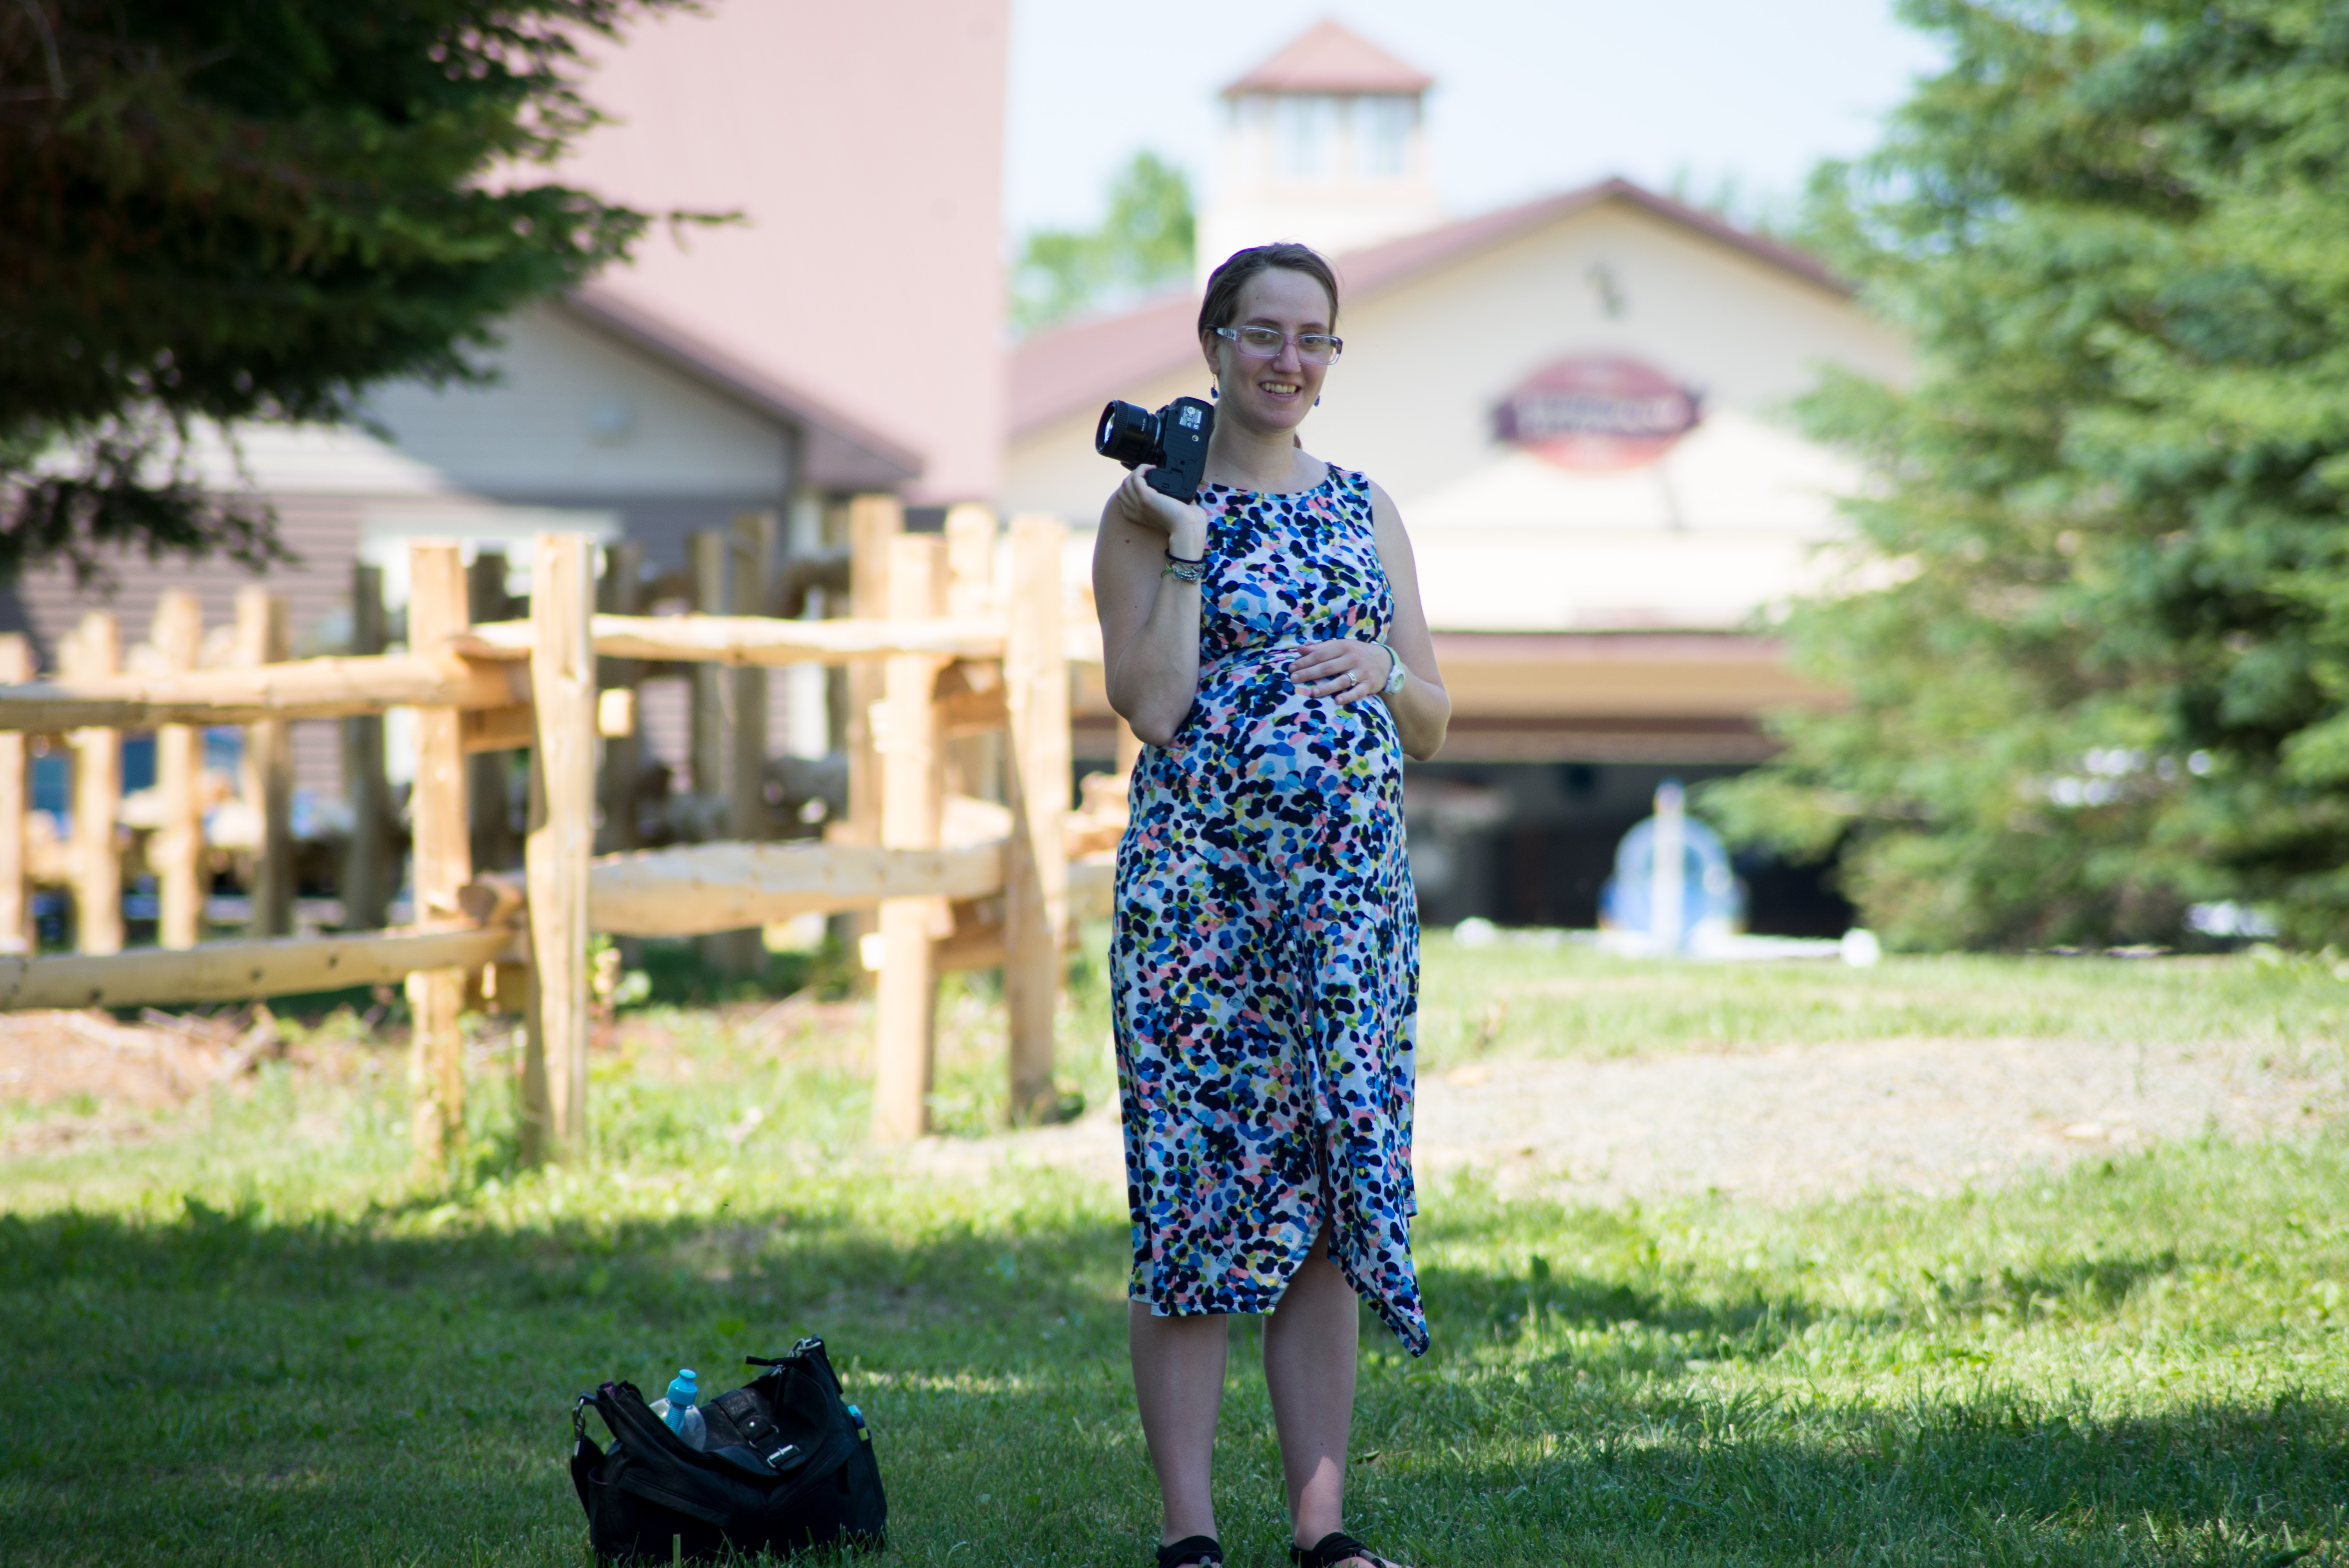 Photographing weddings while pregnant